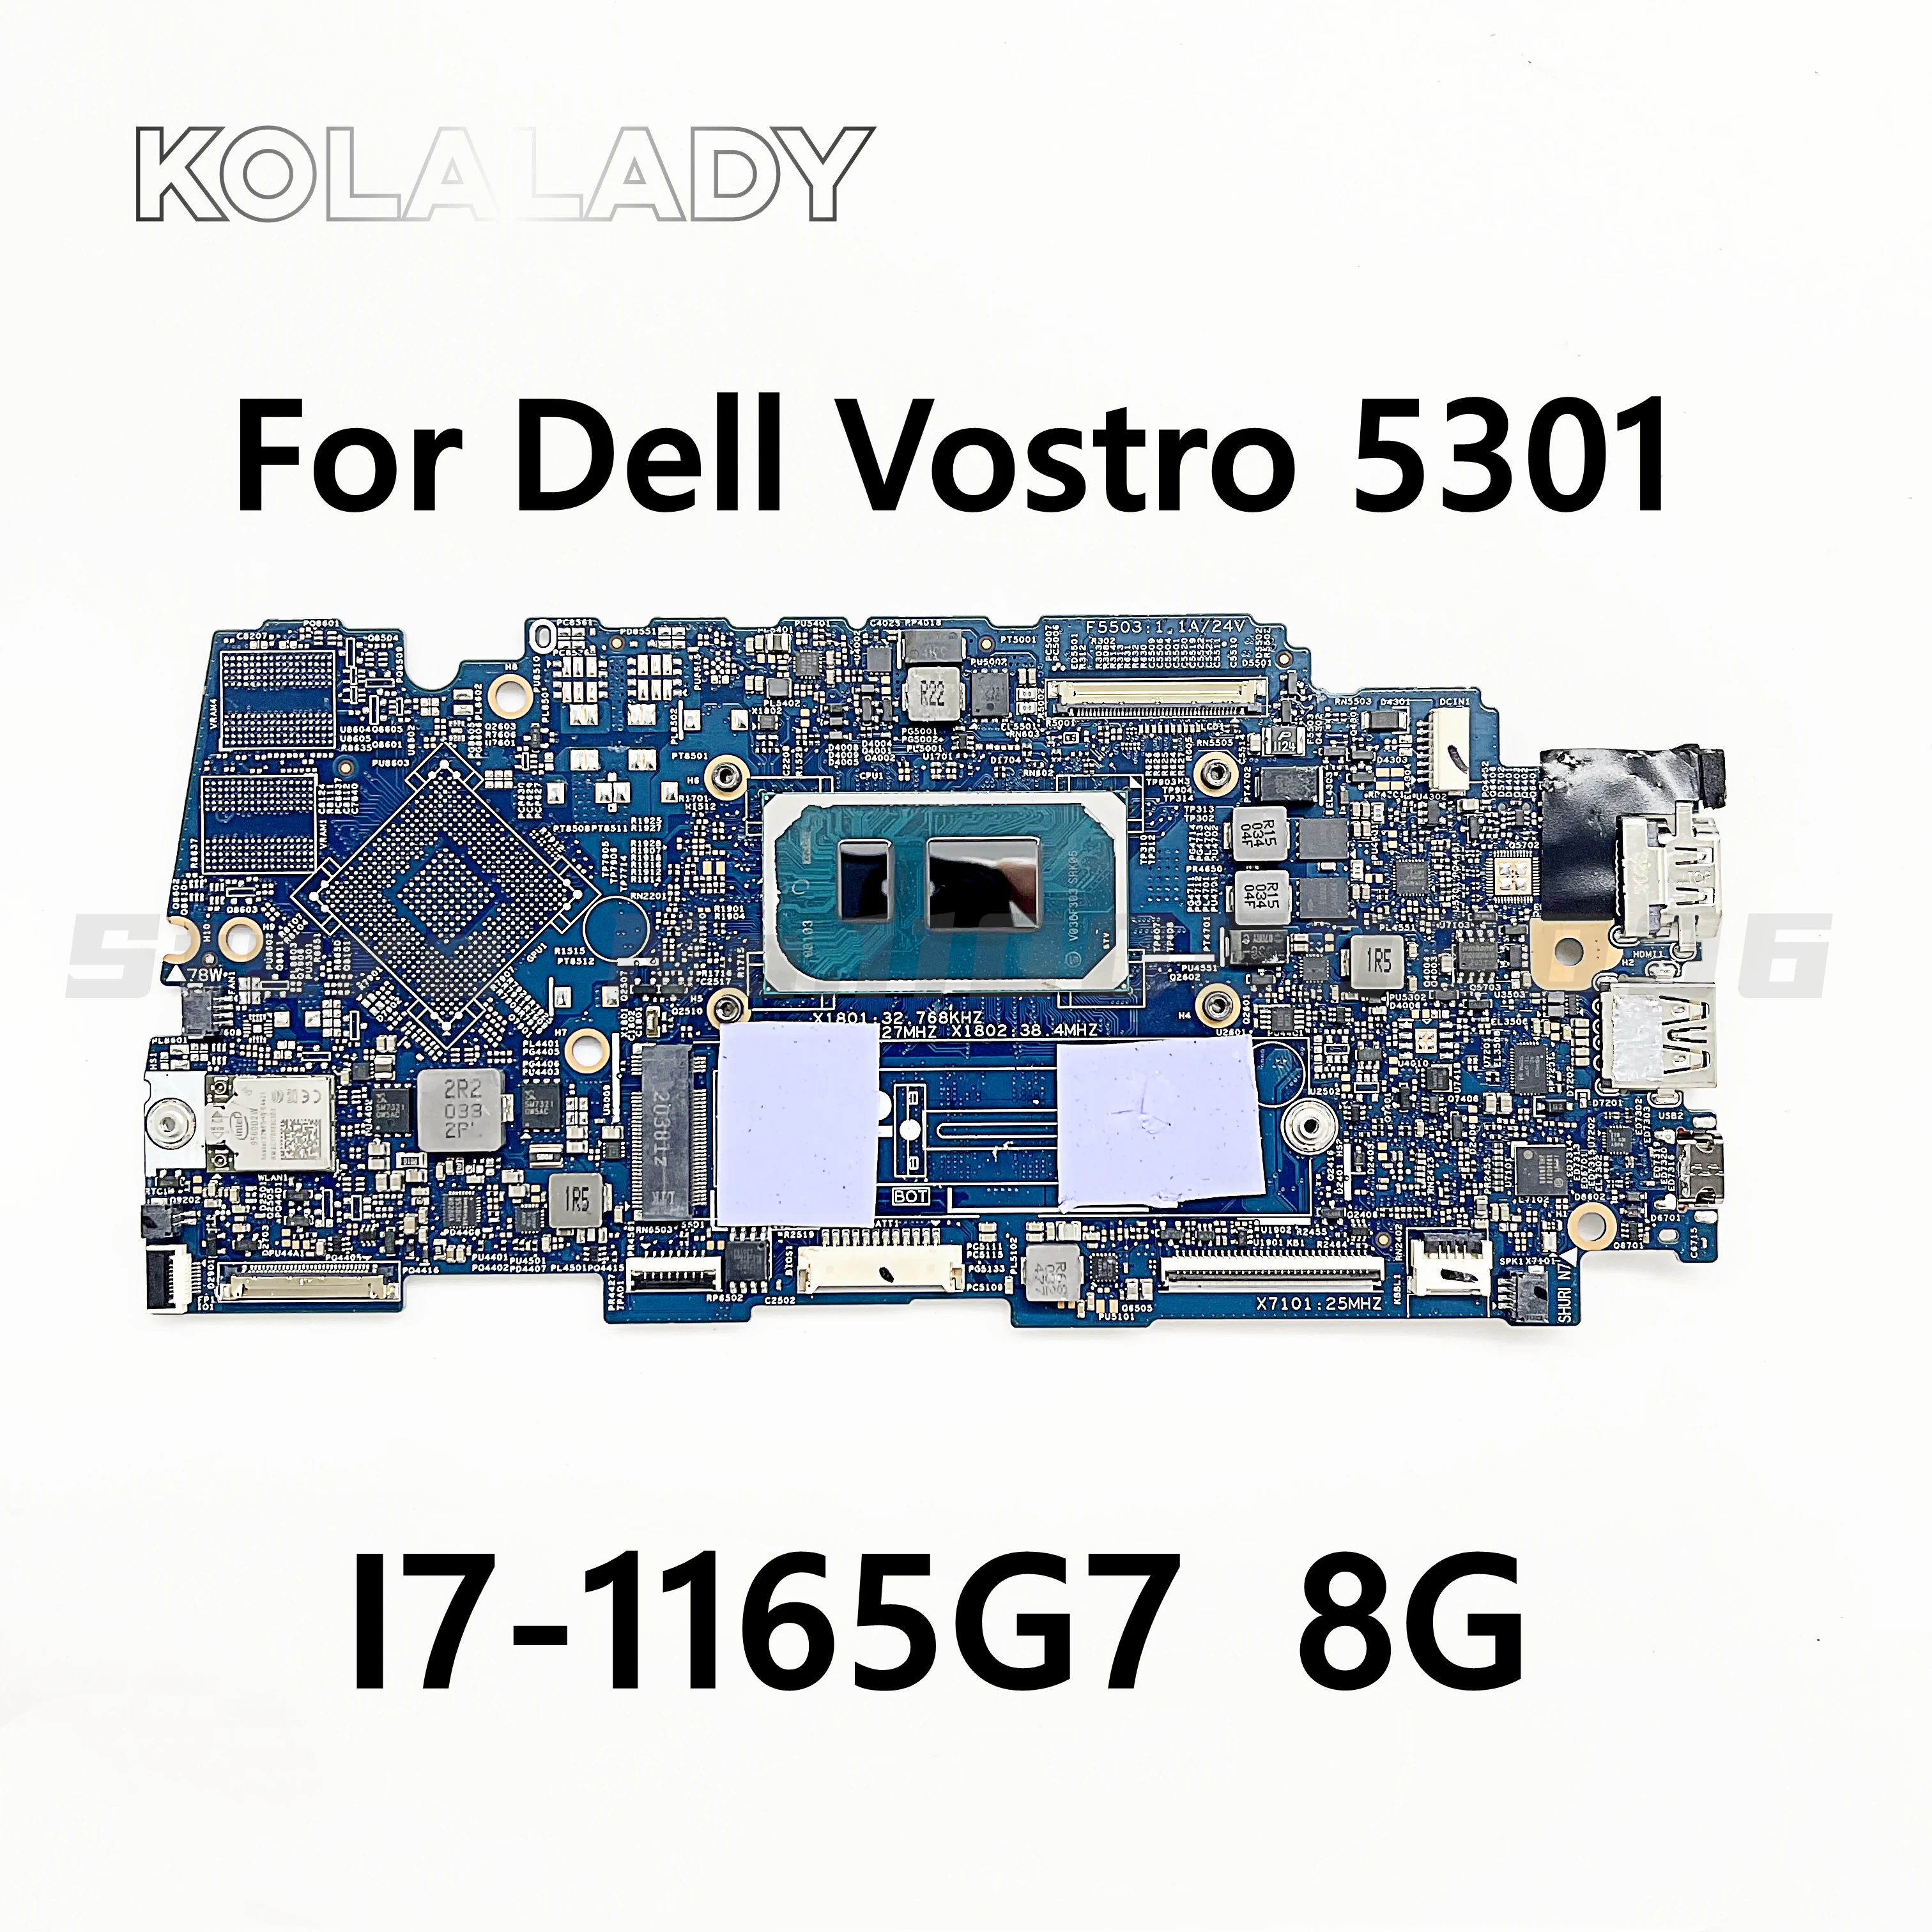 

2W1D5 19765-1 Mainboard For Dell Vostro 5301 Laptop Motherboard With i7-1165G7 CPU 8GB-RAM 100% Fully Tested